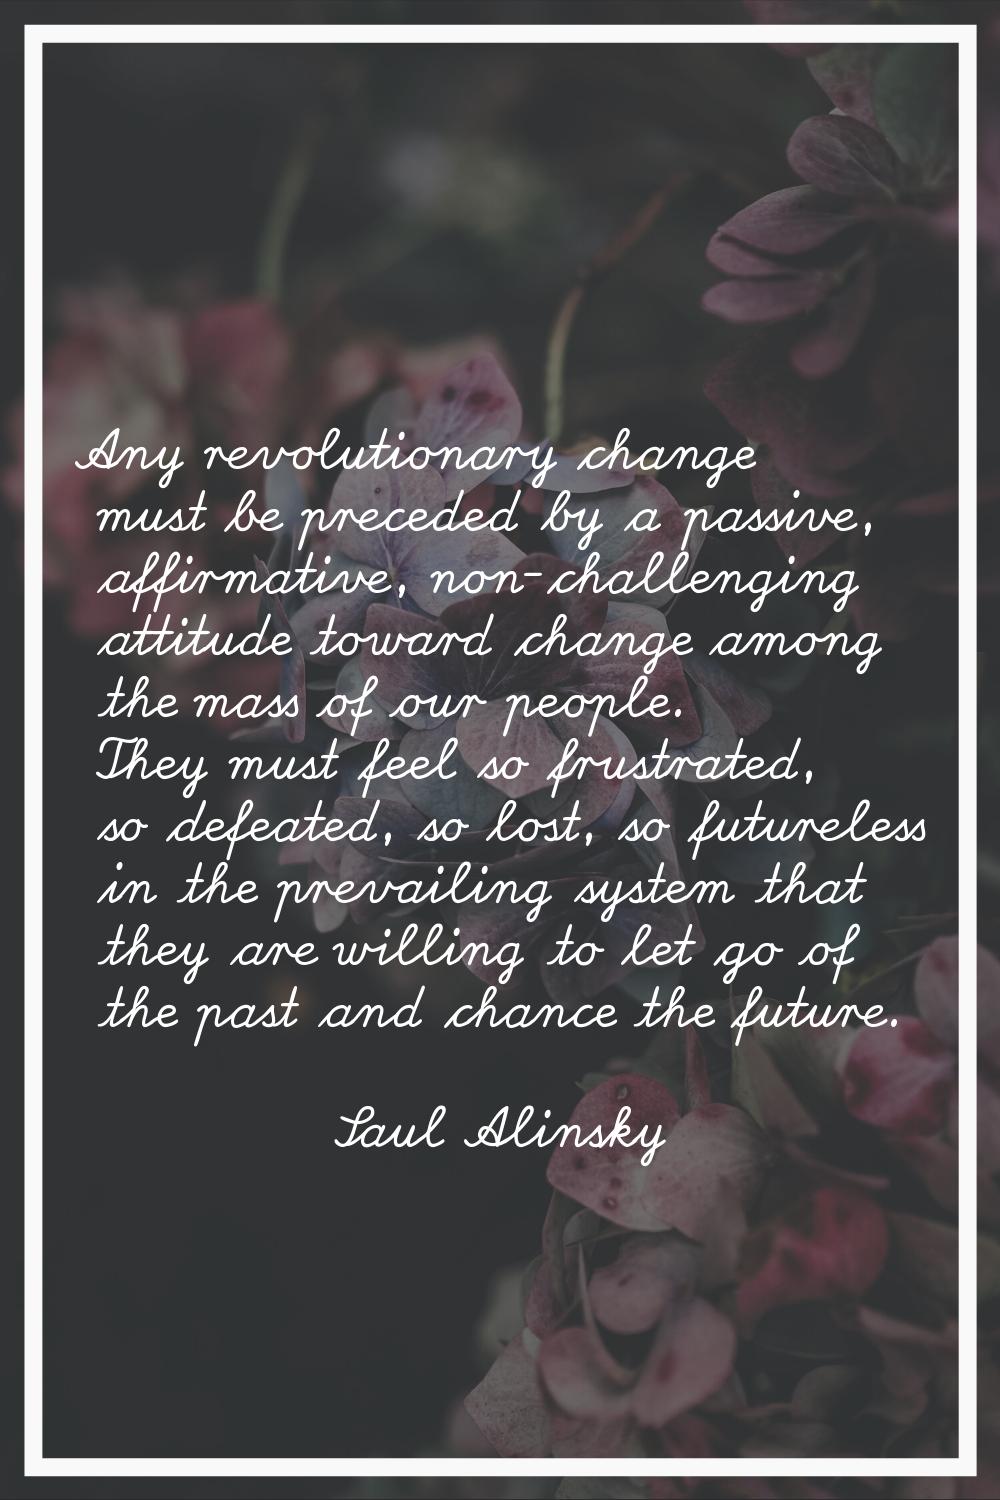 Any revolutionary change must be preceded by a passive, affirmative, non-challenging attitude towar